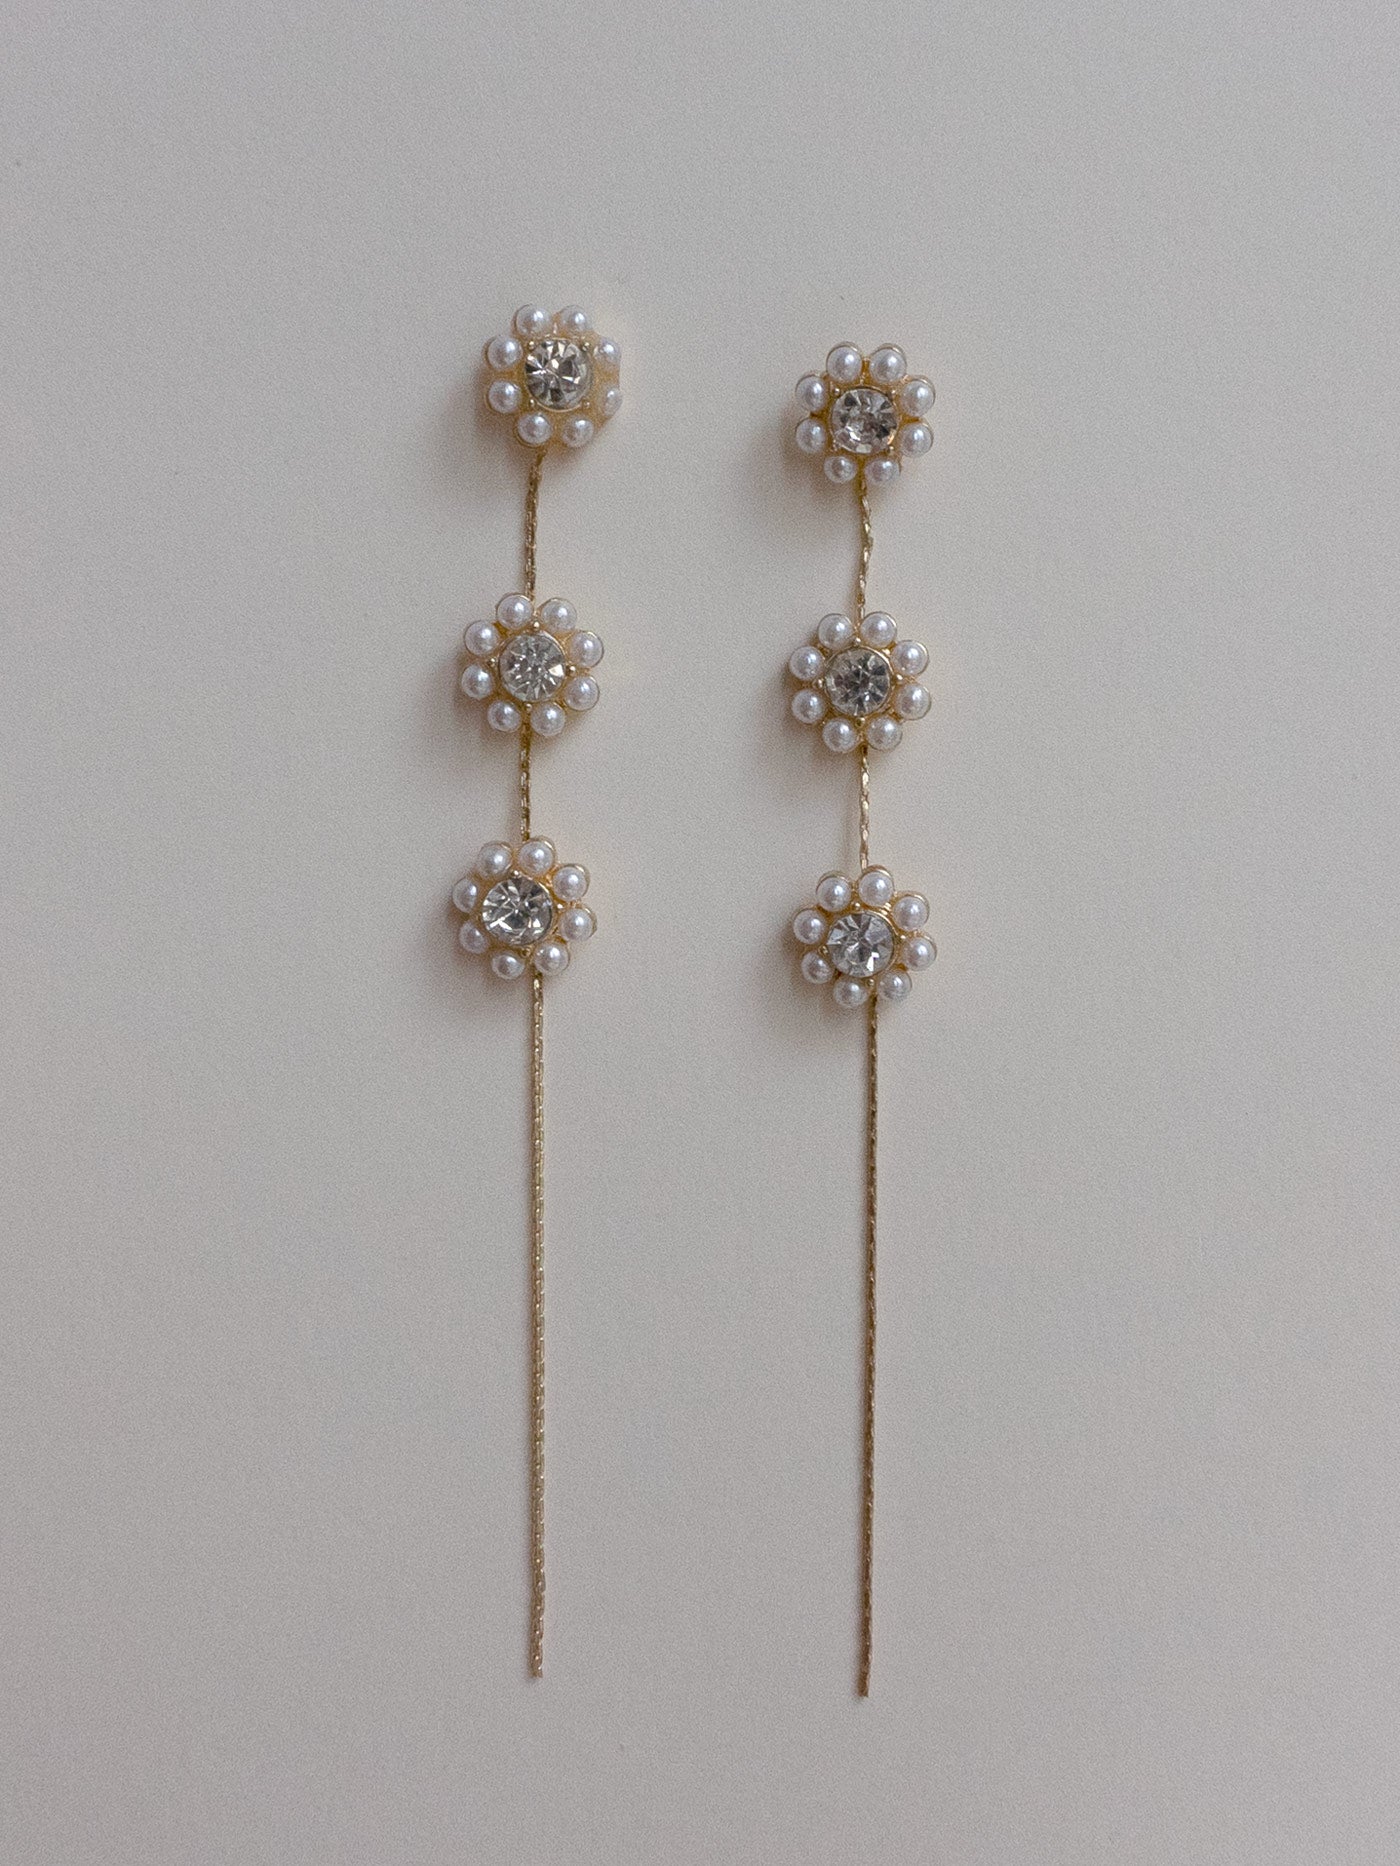 Long Floral Earrings With Pearls And Gemstones